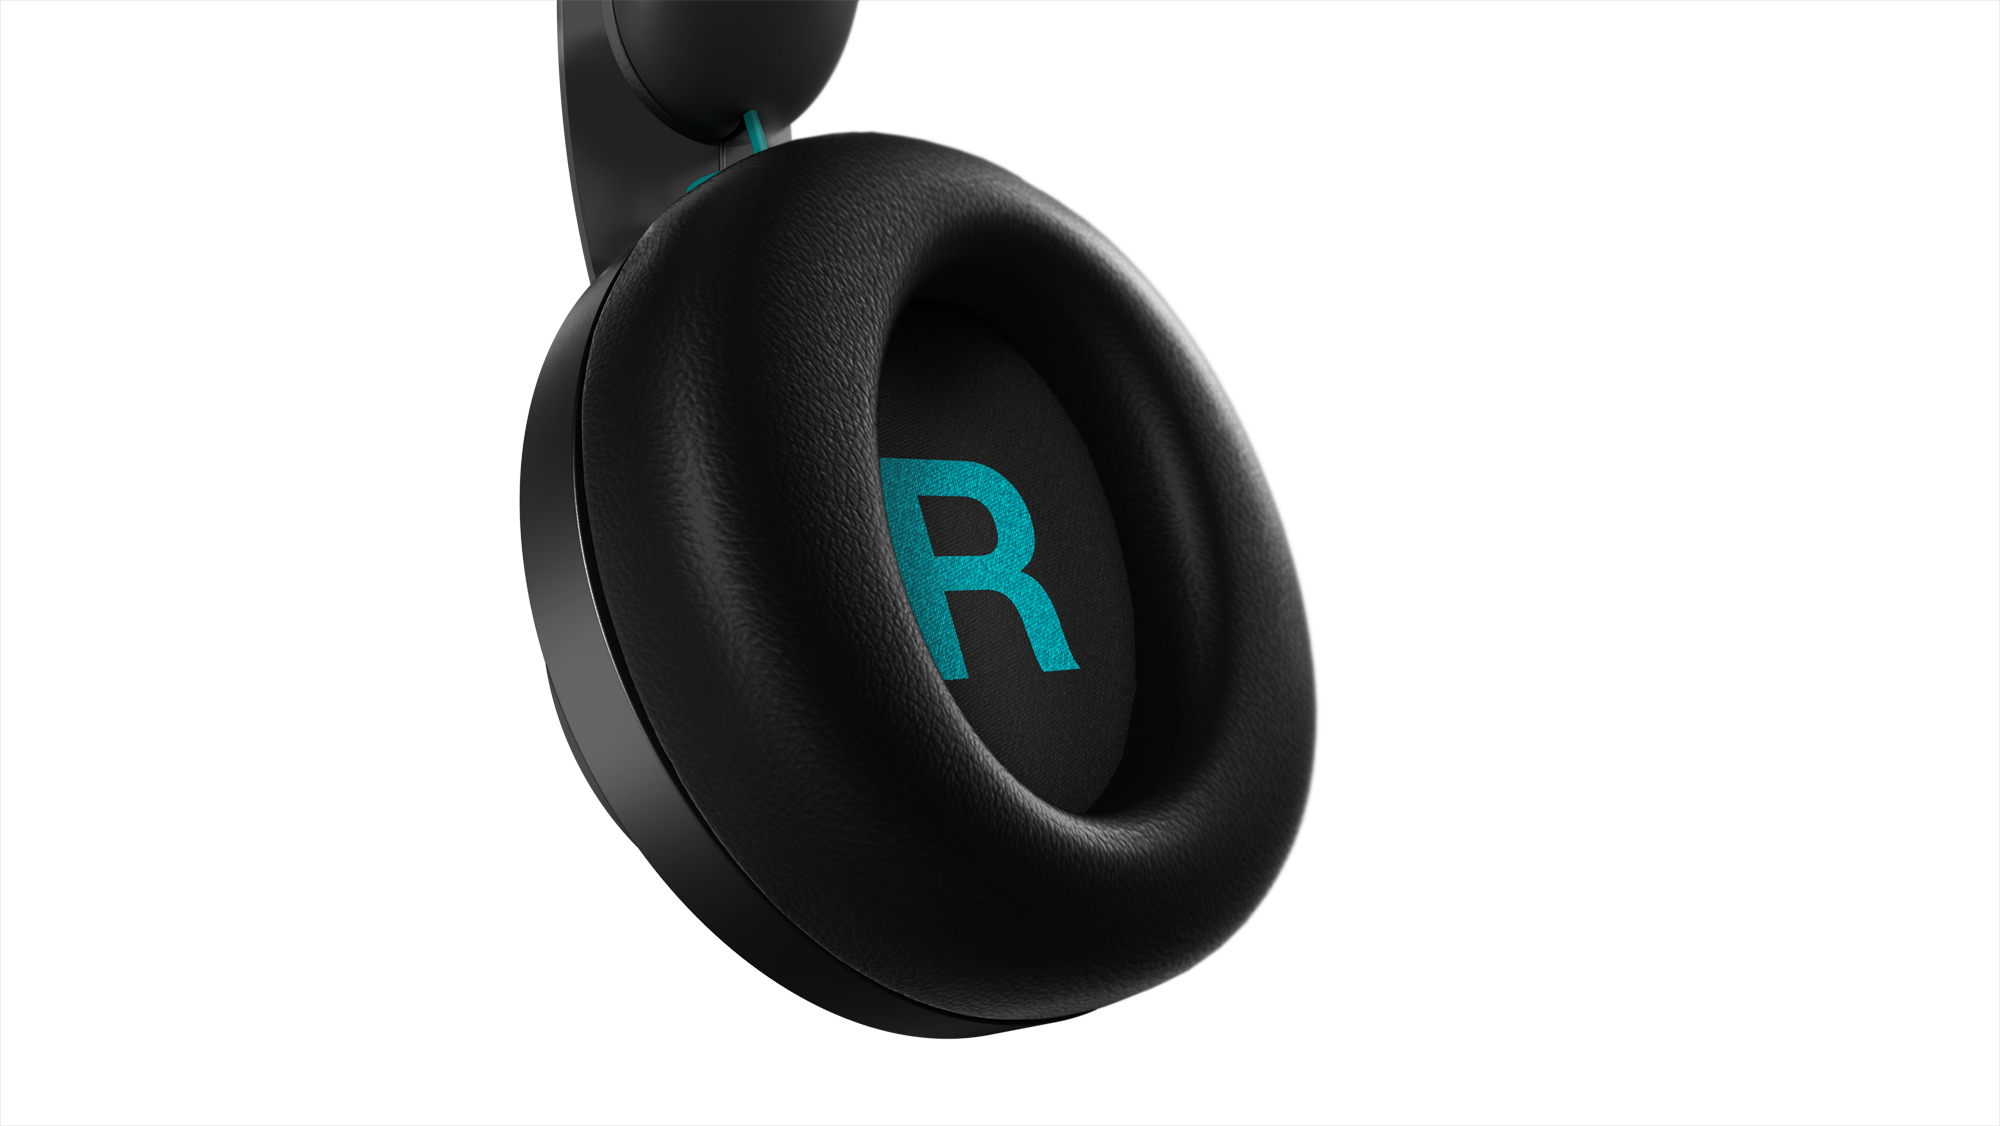 lenovo announce new legion gaming peripherals ces 2019 05 h300 hero rotatable earcups